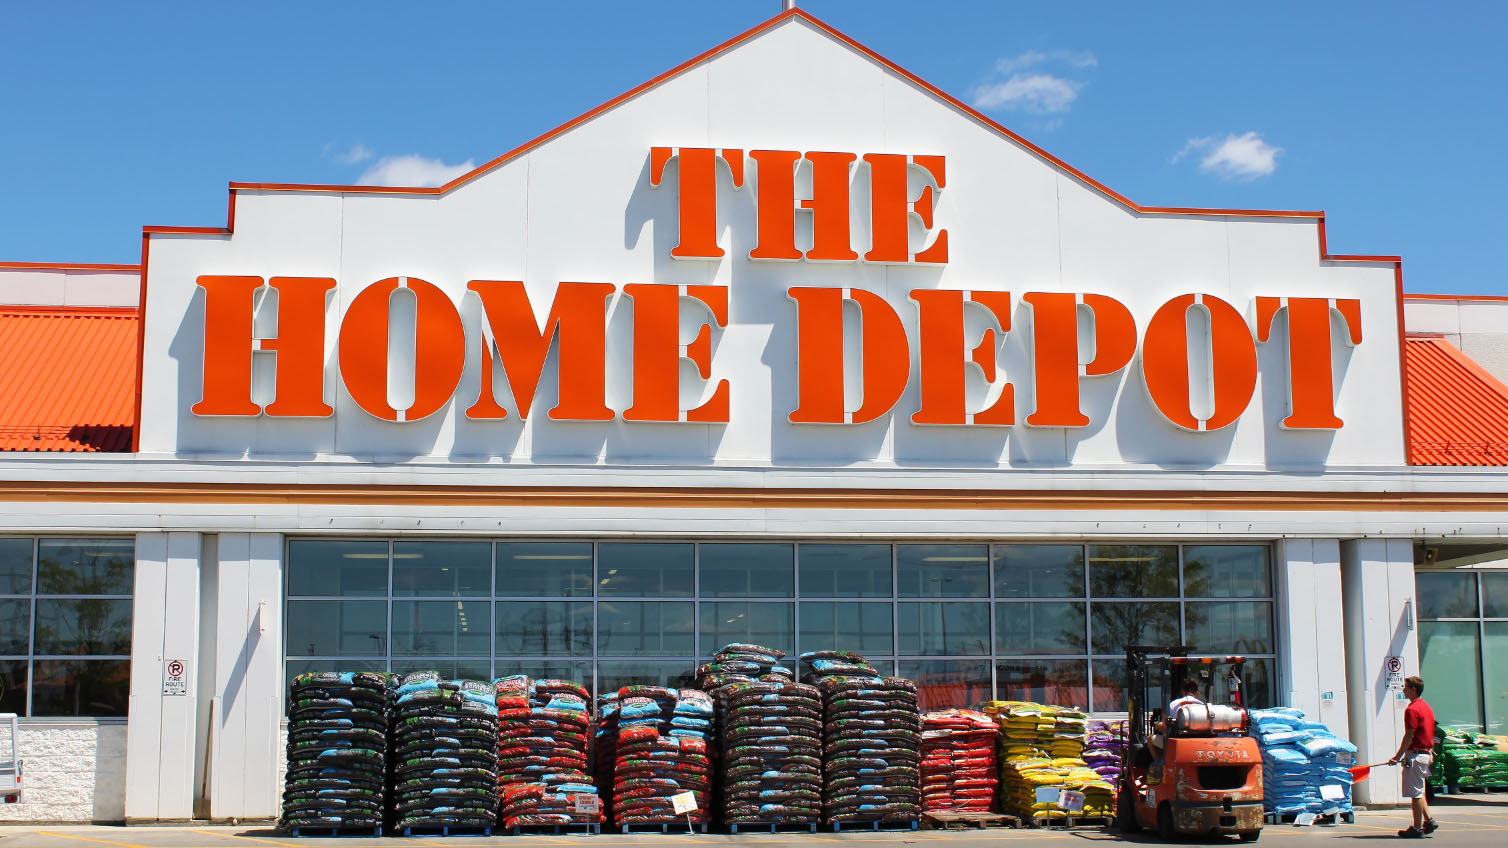 Home Depot failed to get consent before sharing customer data with Meta, privacy office found